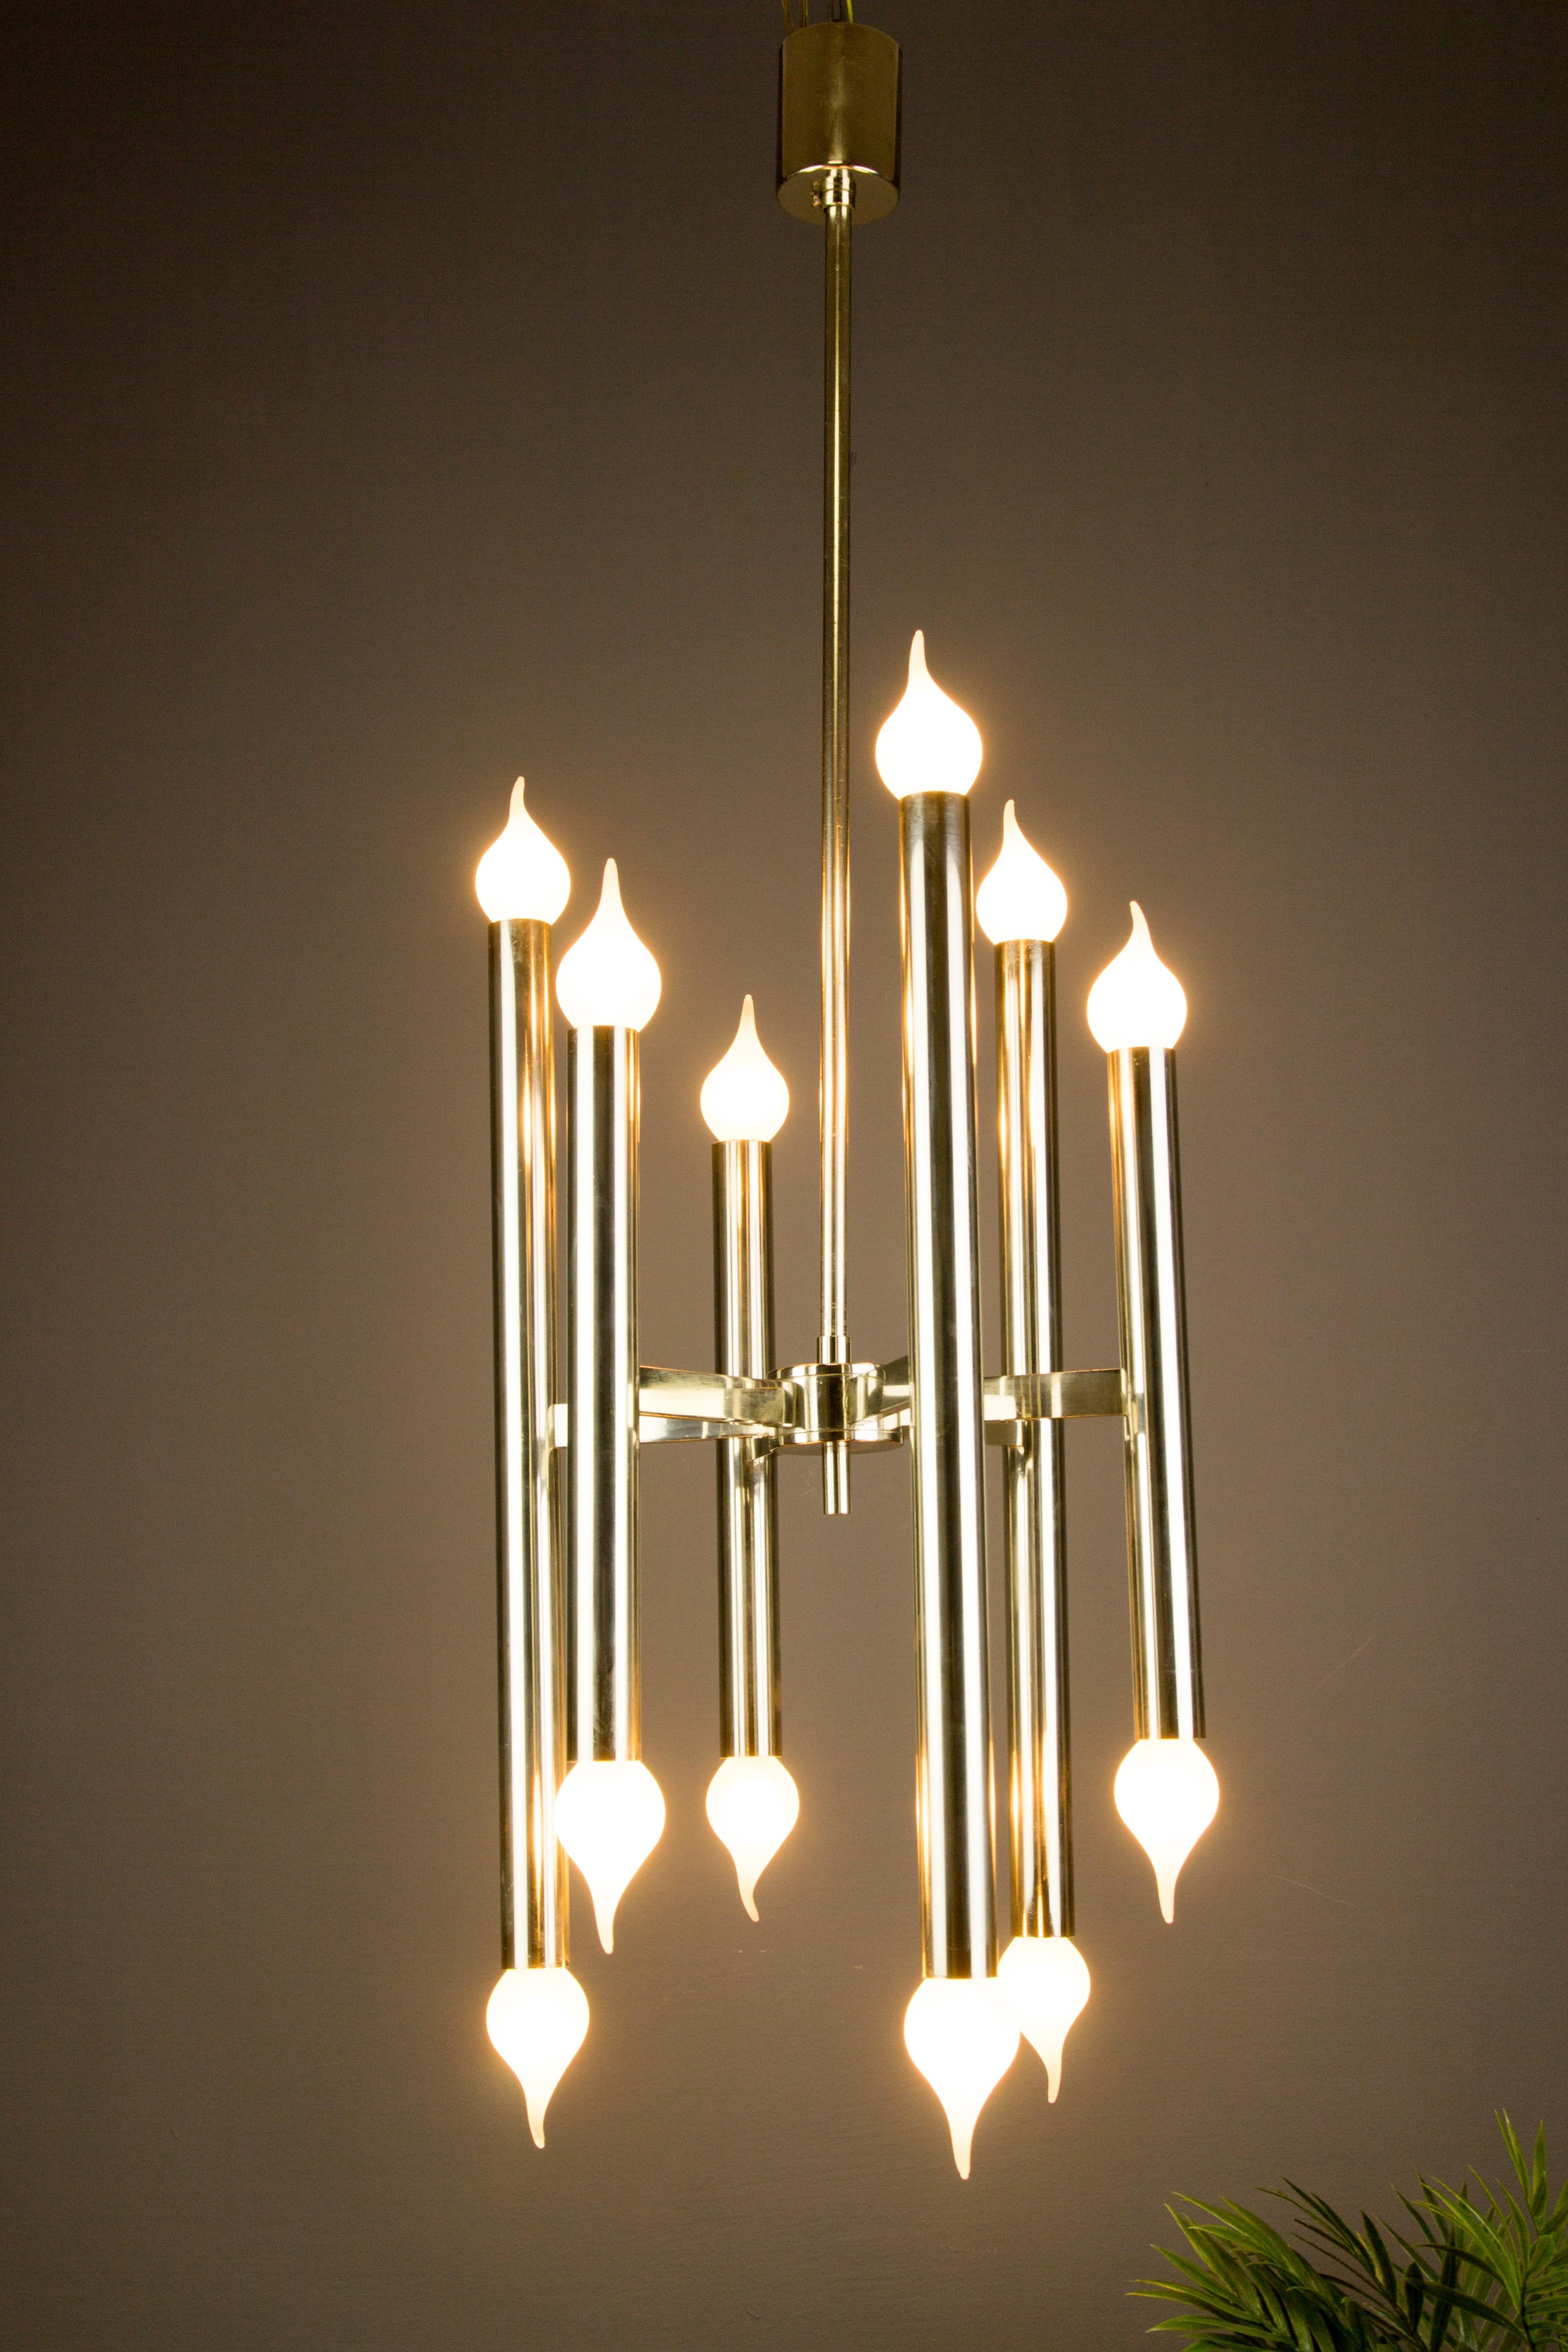 Italian chromed chandelier with twelve cylindrical lights arranged in a circular formation with six lights on the top and six on the bottom, from the 1970s.  Twelve sockets for E14 size light bulbs. This elegant Mid-Century Modern chandelier is